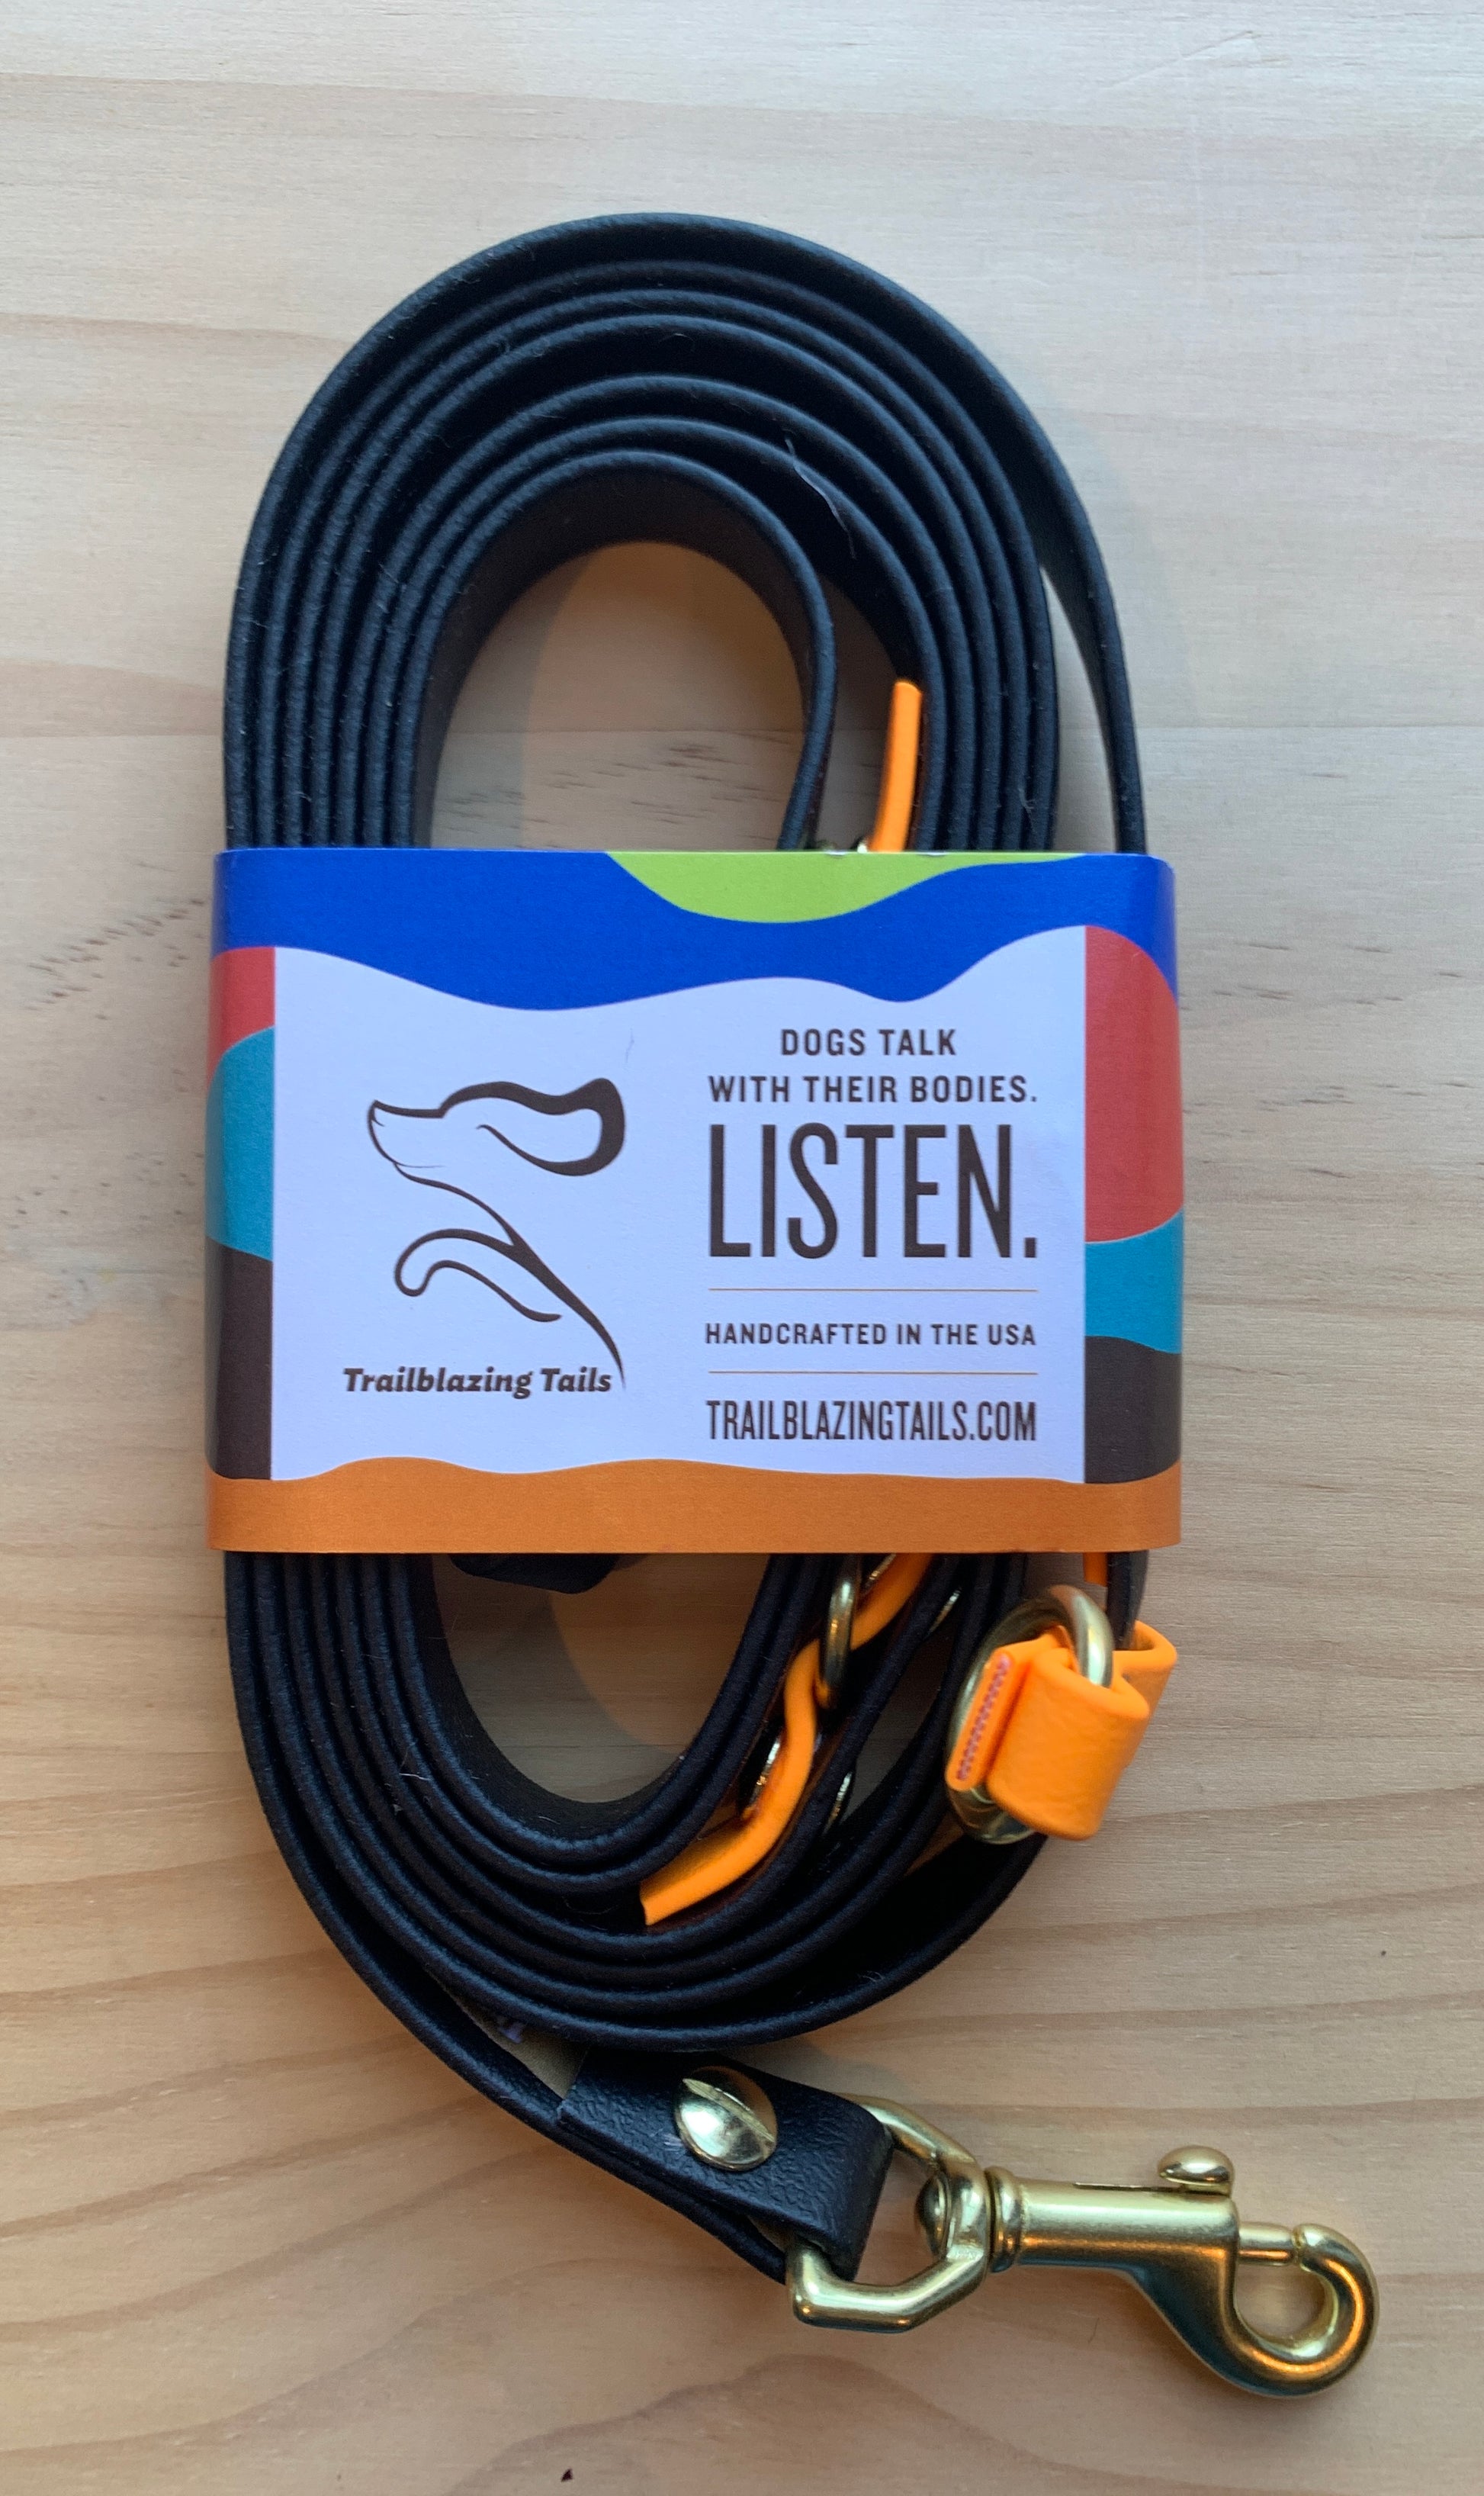 A Trailblazing Tails: The Sunny dog leash with adjustable length, featuring a tag and a striking black and orange color scheme by Your Whole Dog.